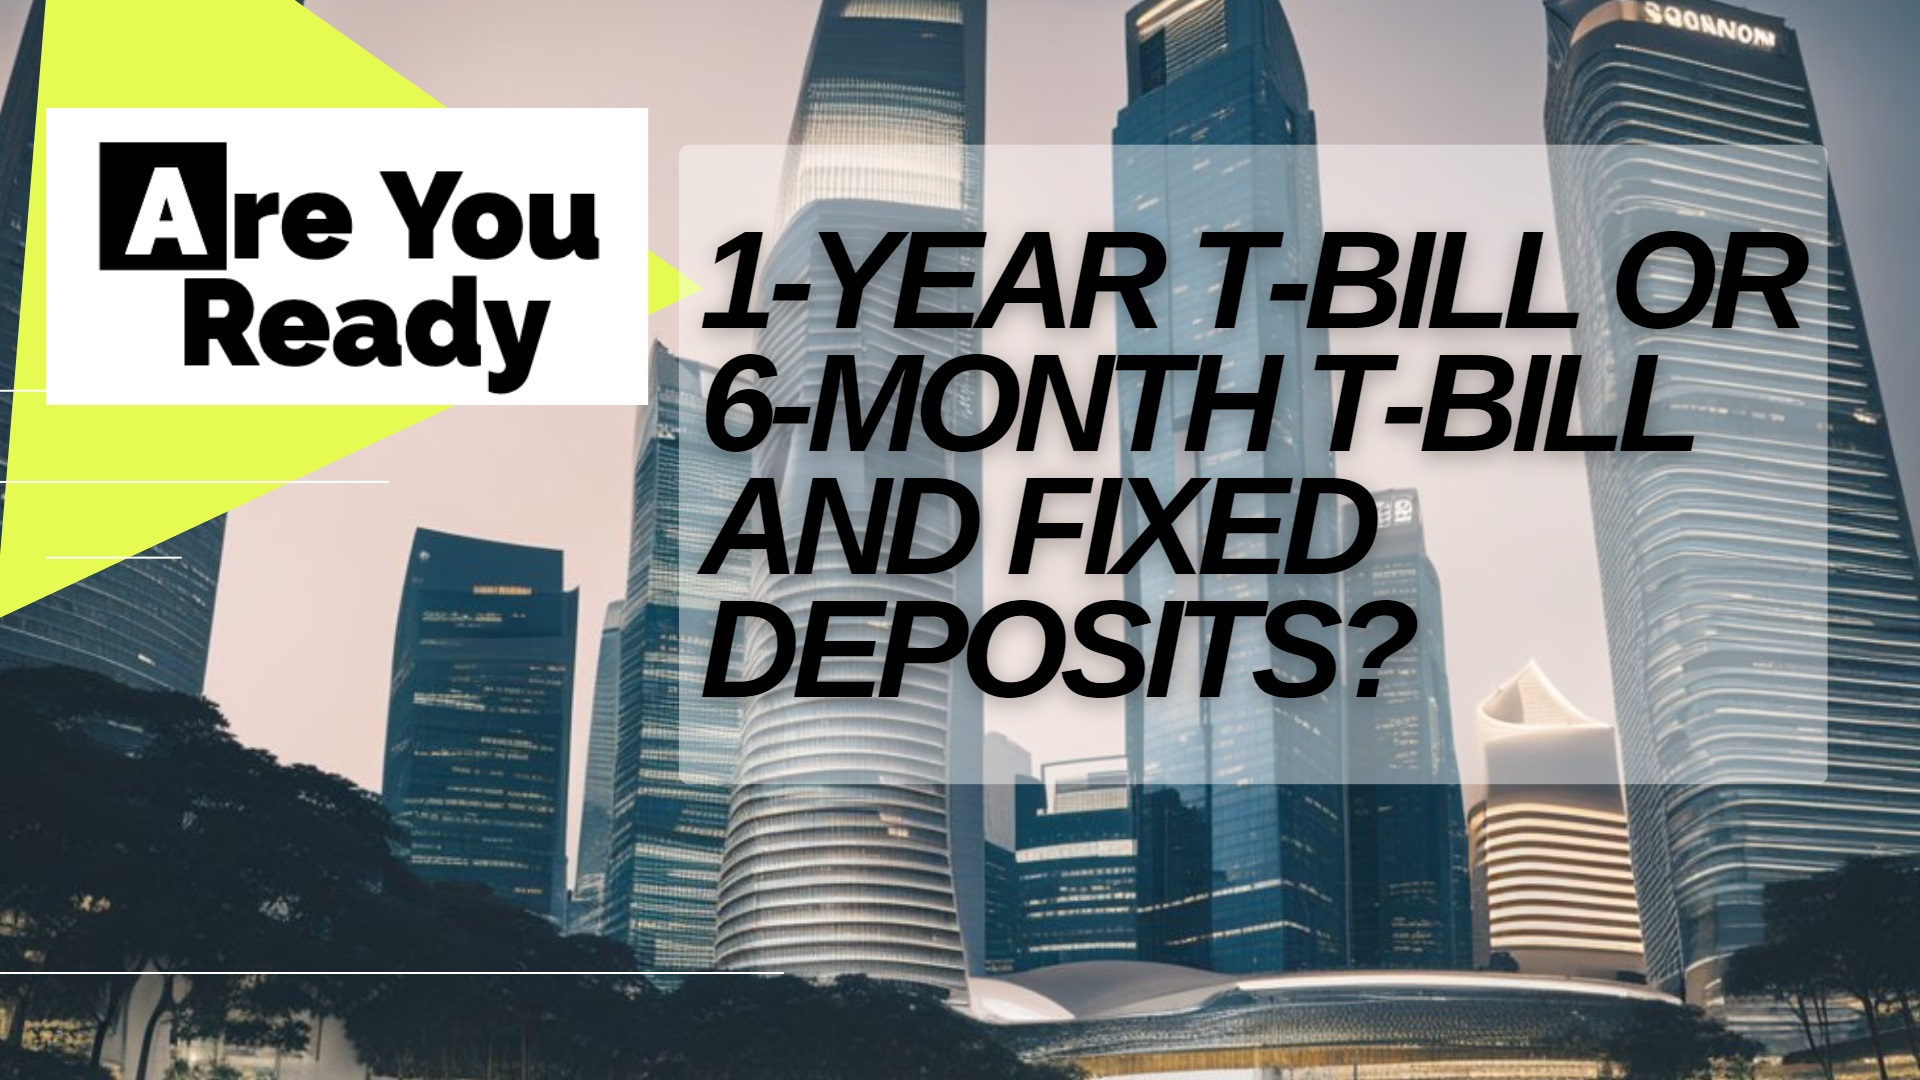 Is the 1-year T-bill Better than the 6-month T-bill and Fixed Deposits in Singapore?